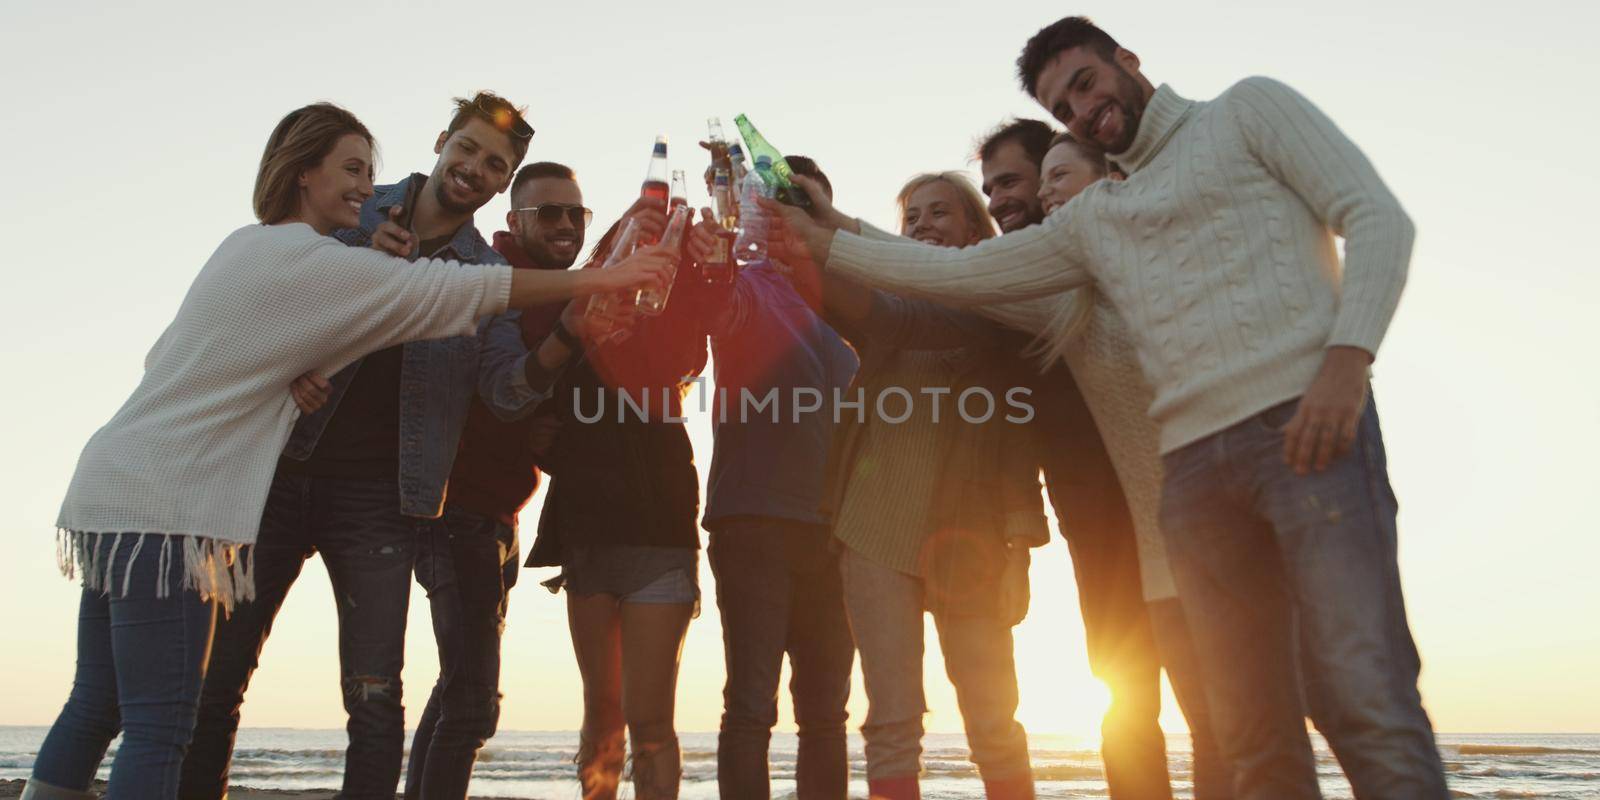 Friends on beach party drinking beer and having fun by dotshock